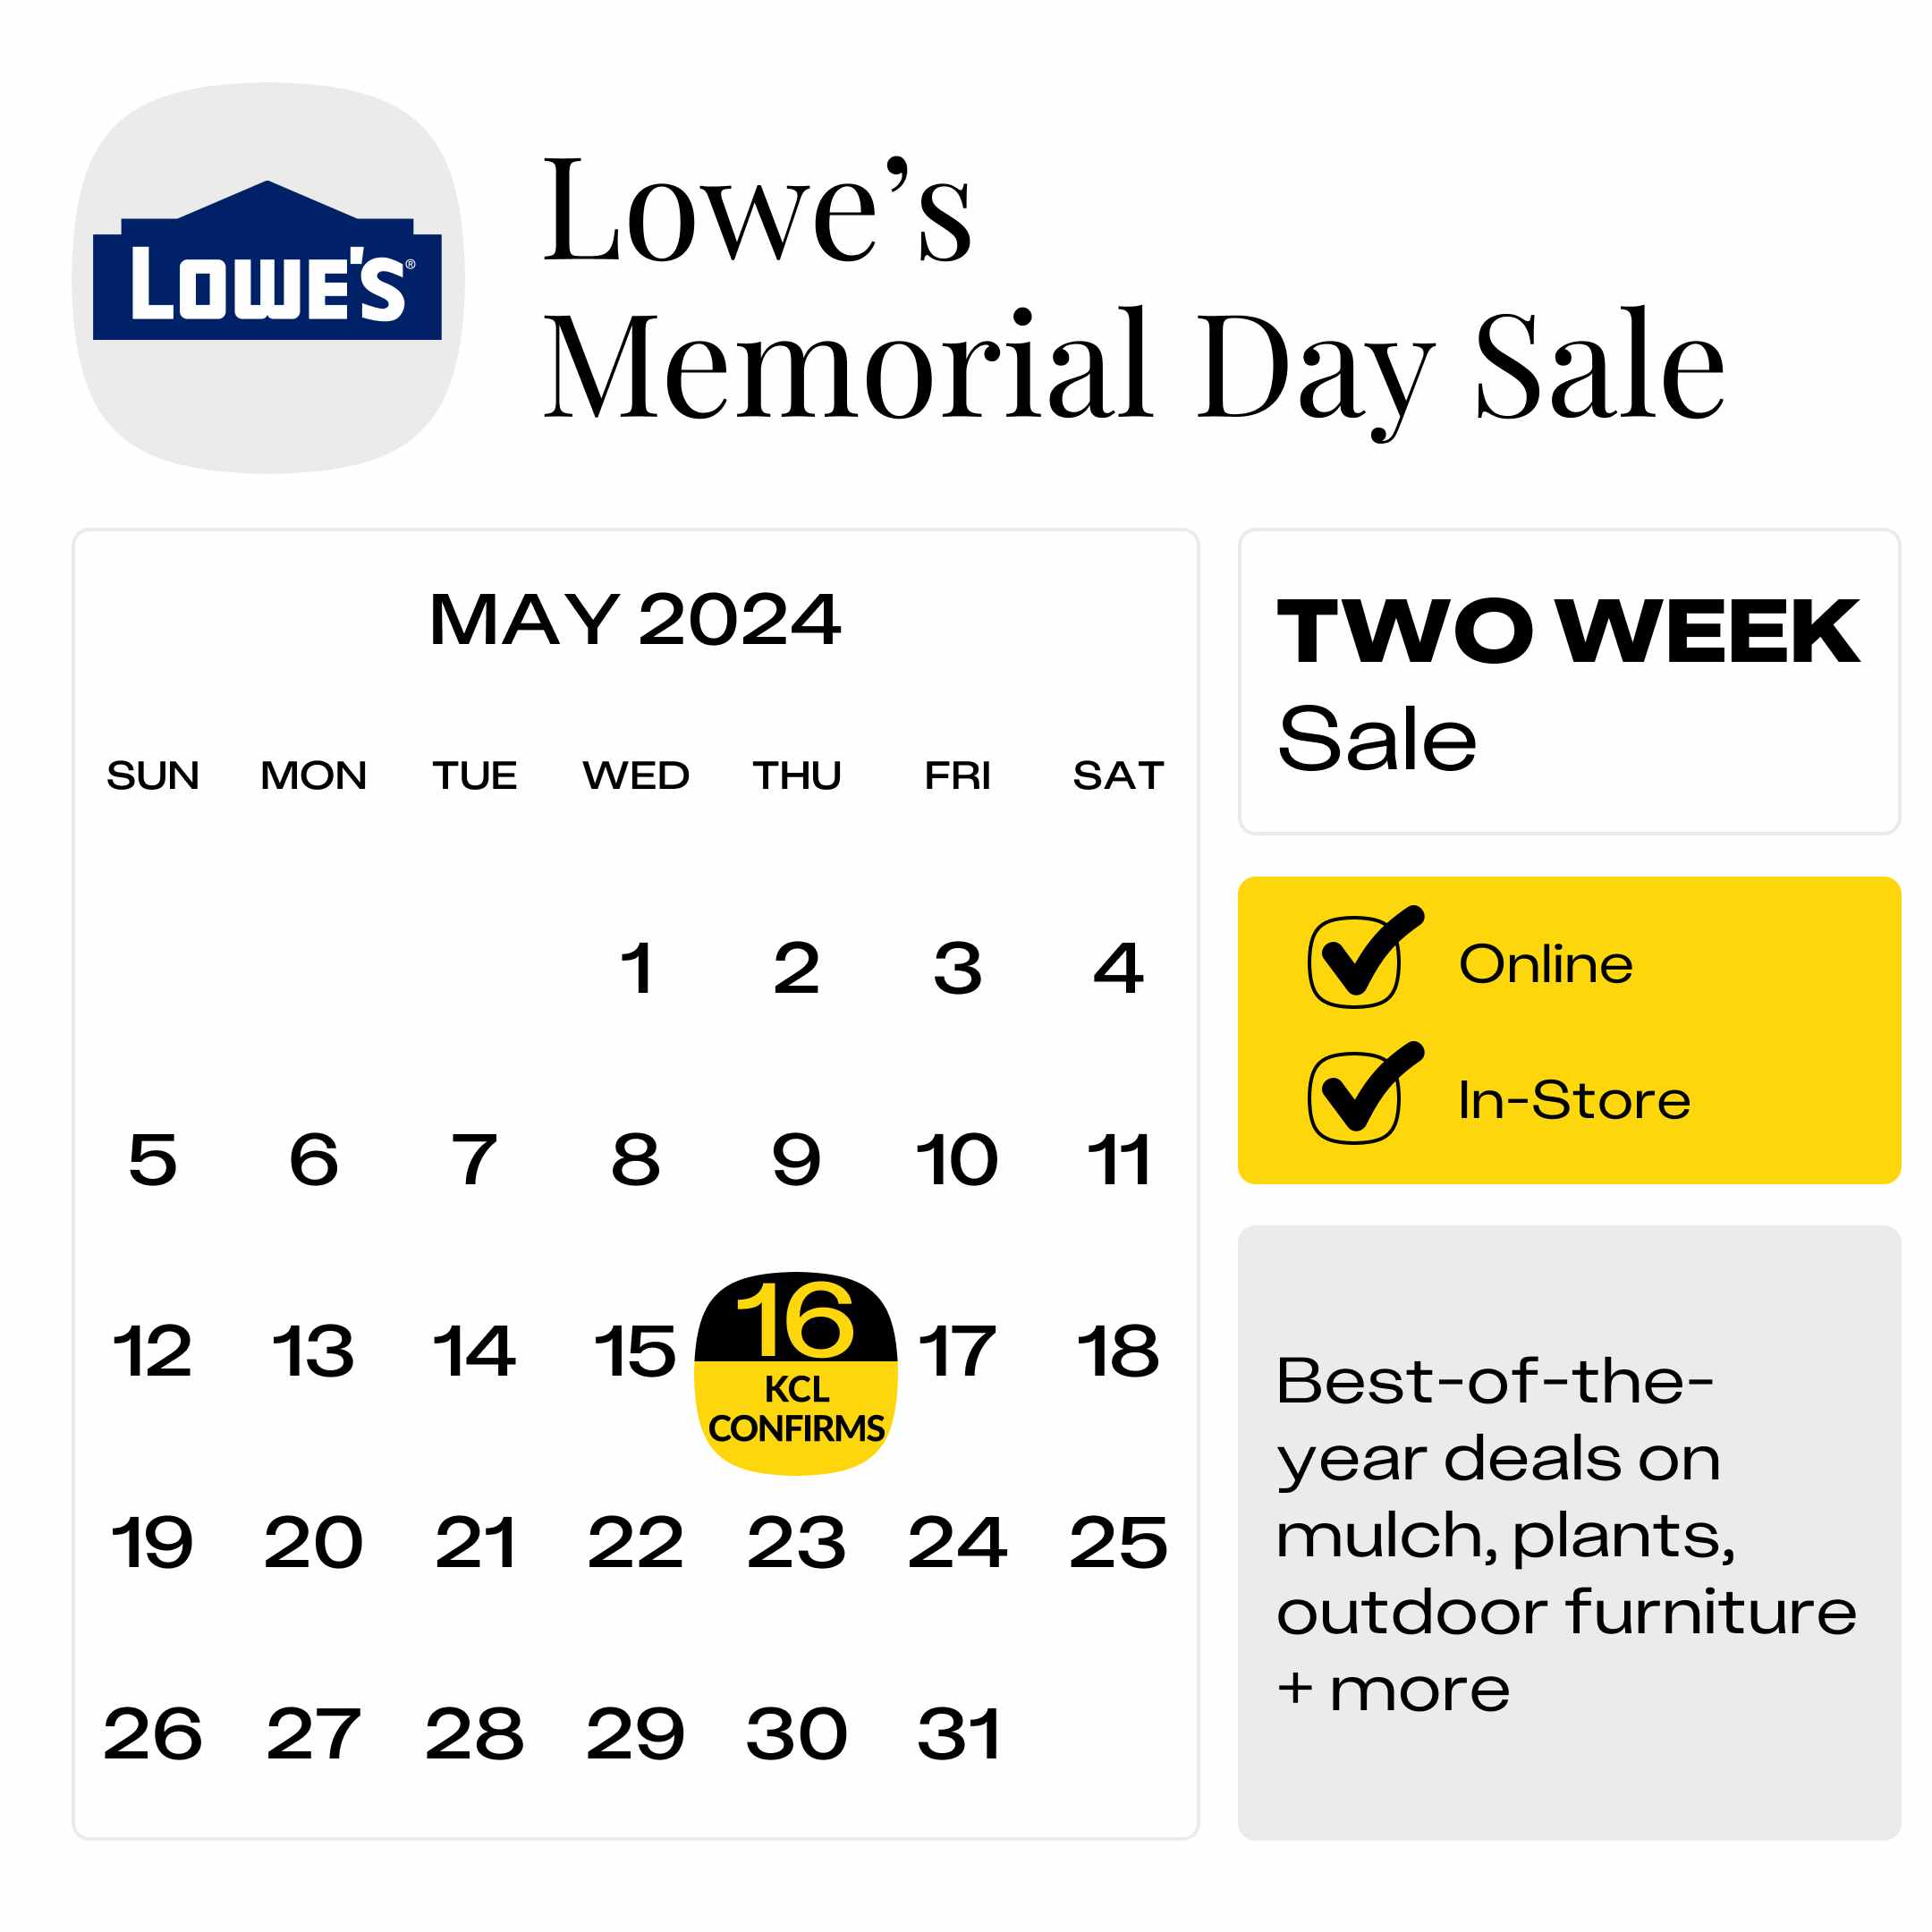 Lowes-Memorial-Day-Sale